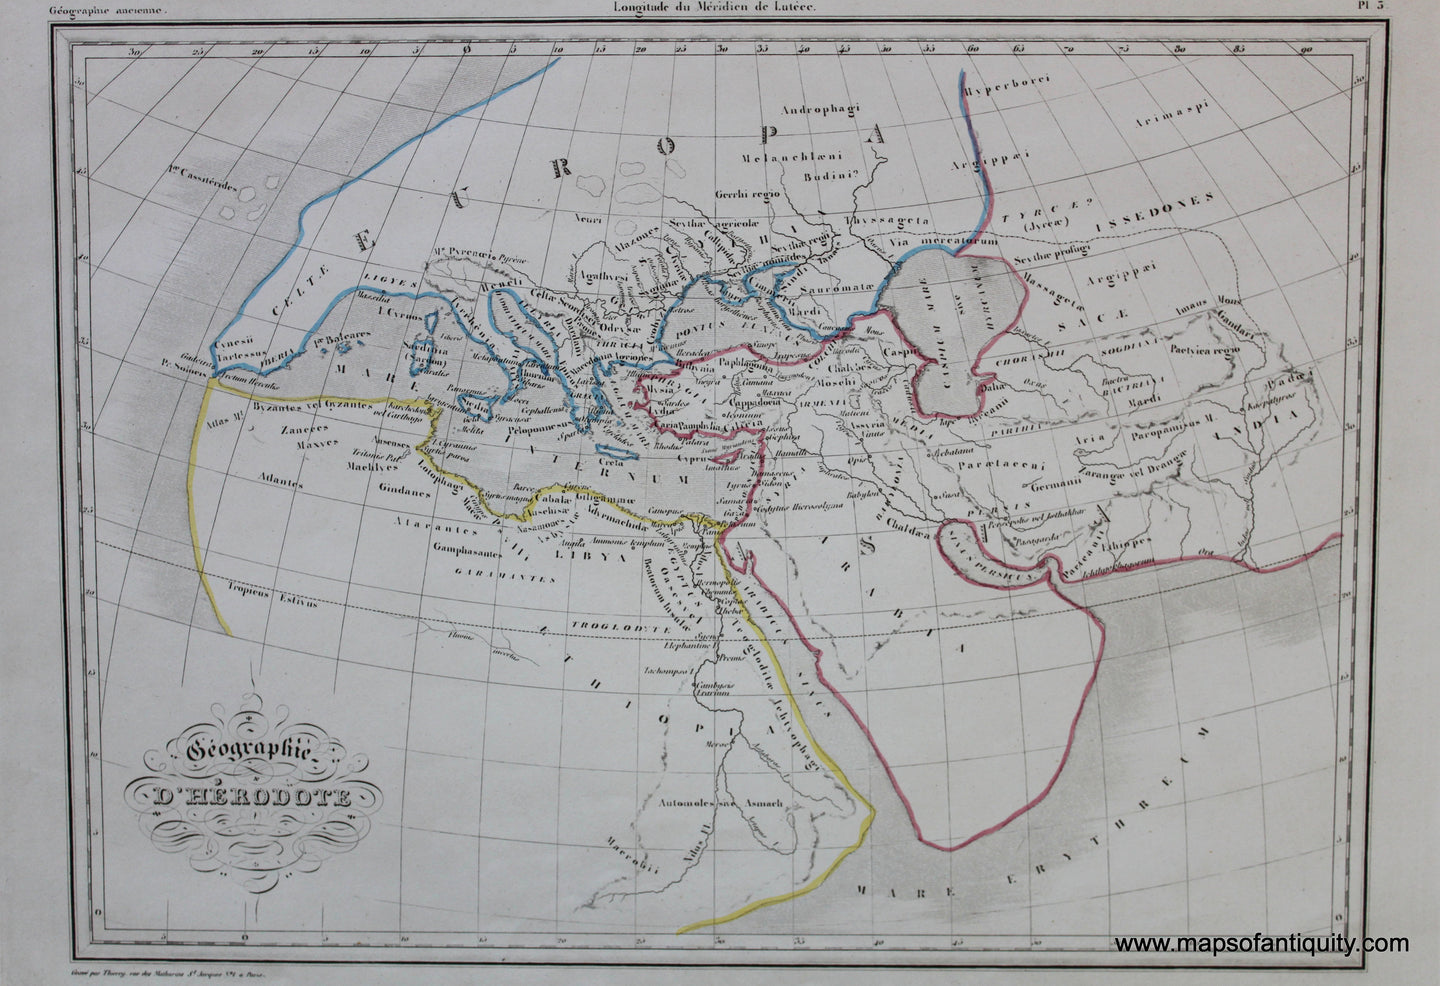 Antique-Hand-Colored-Map-Geographie-d'Herodote-World--1846-M.-Malte-Brun-Maps-Of-Antiquity